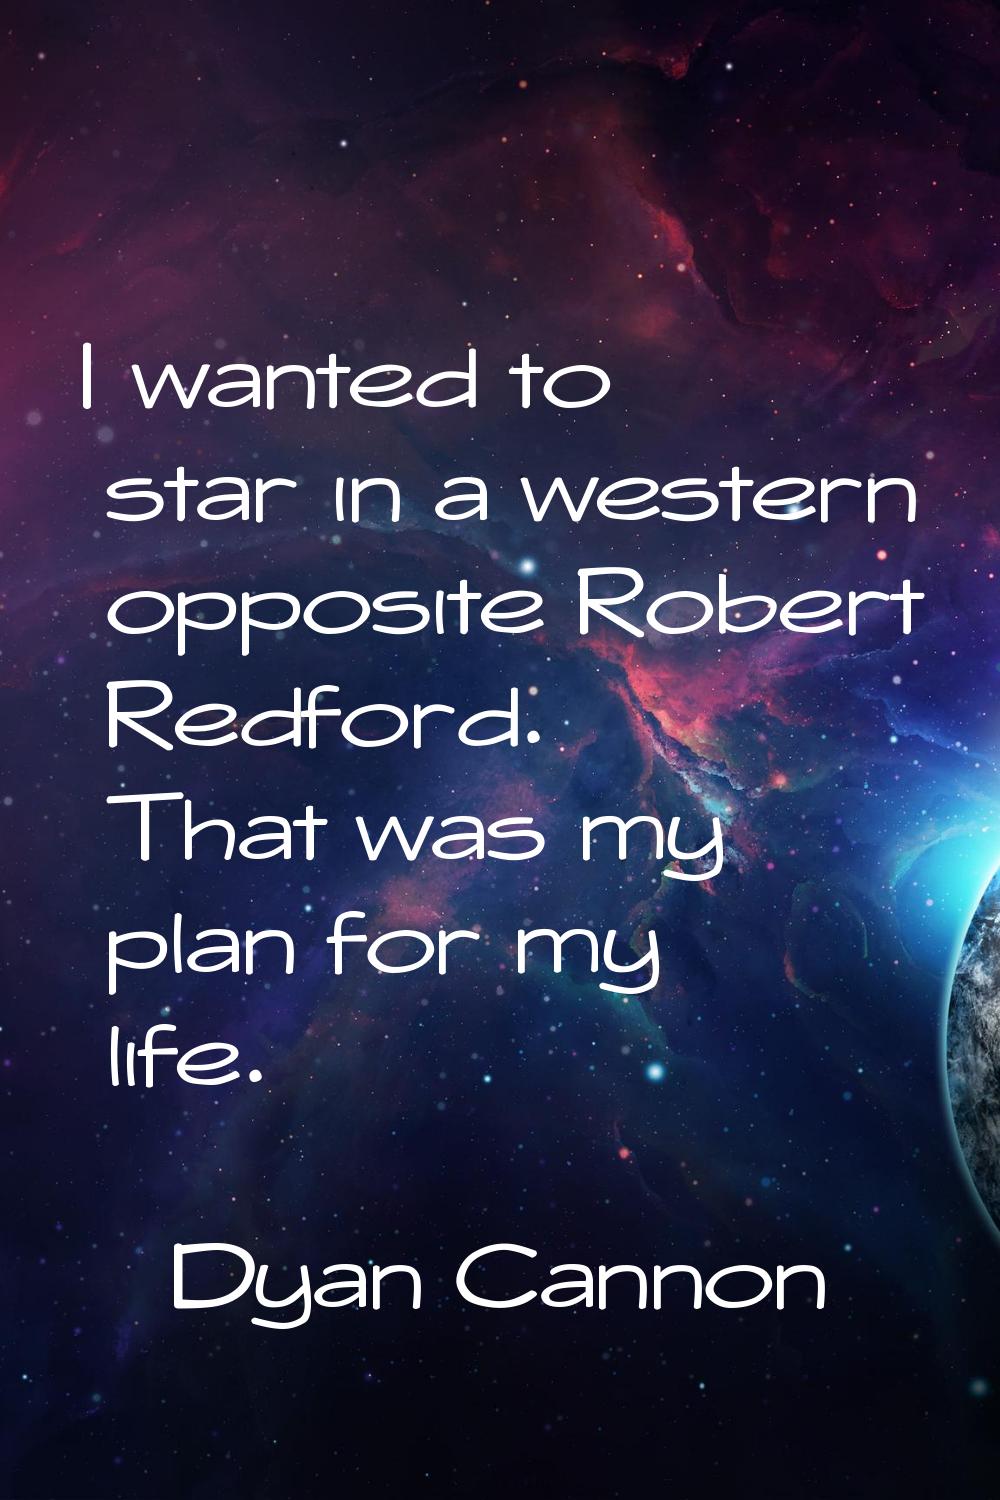 I wanted to star in a western opposite Robert Redford. That was my plan for my life.